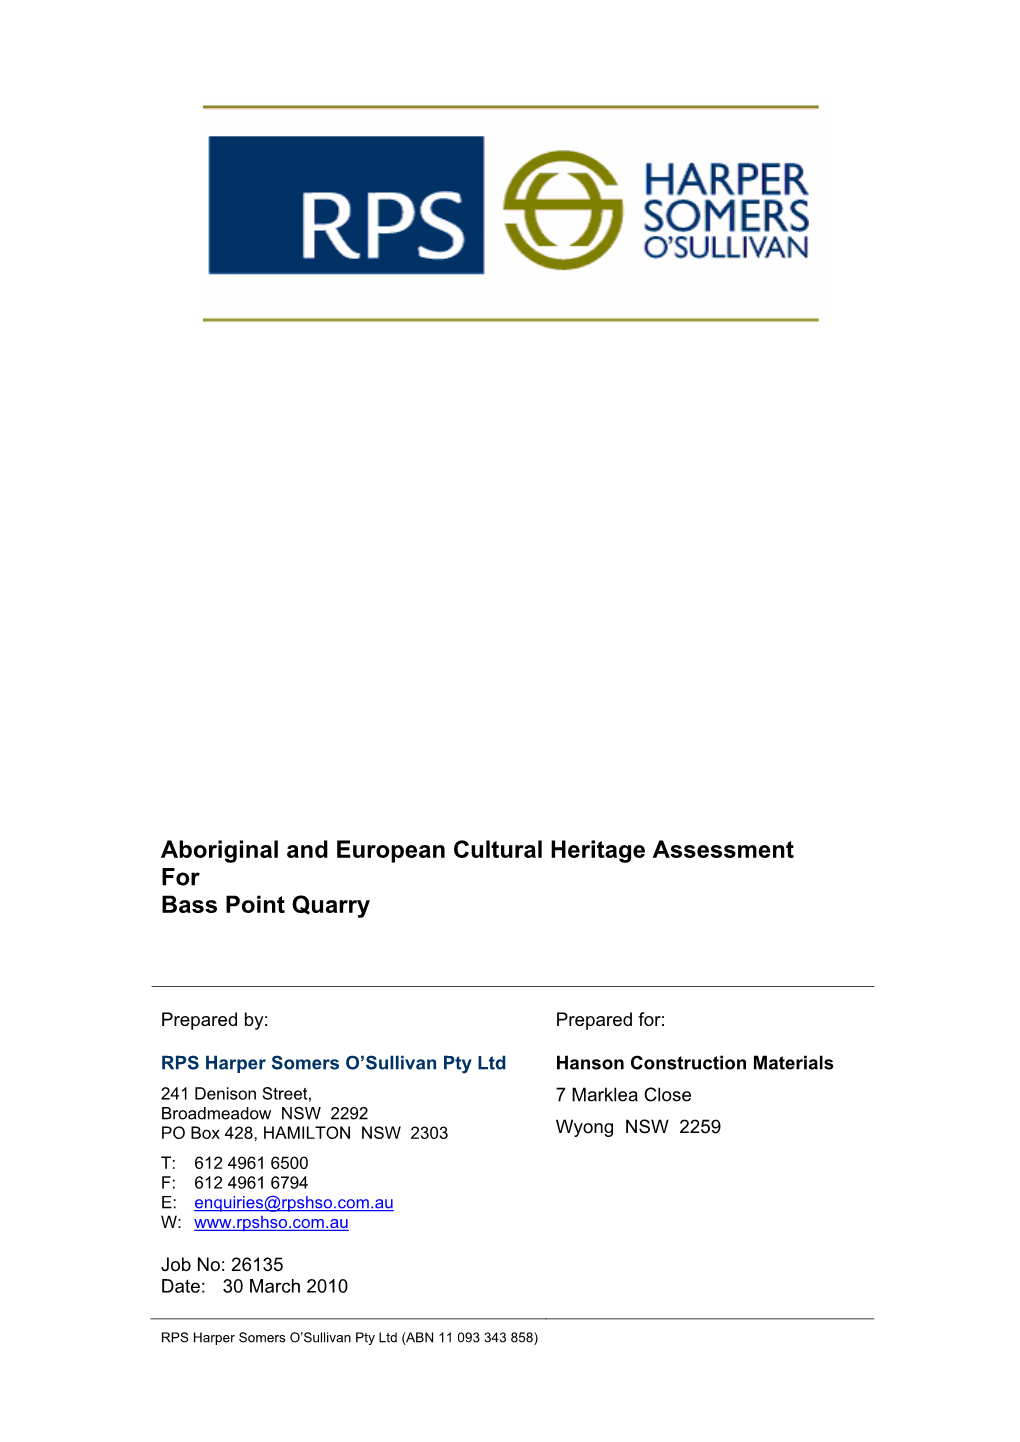 Aboriginal and European Cultural Heritage Assessment for Bass Point Quarry